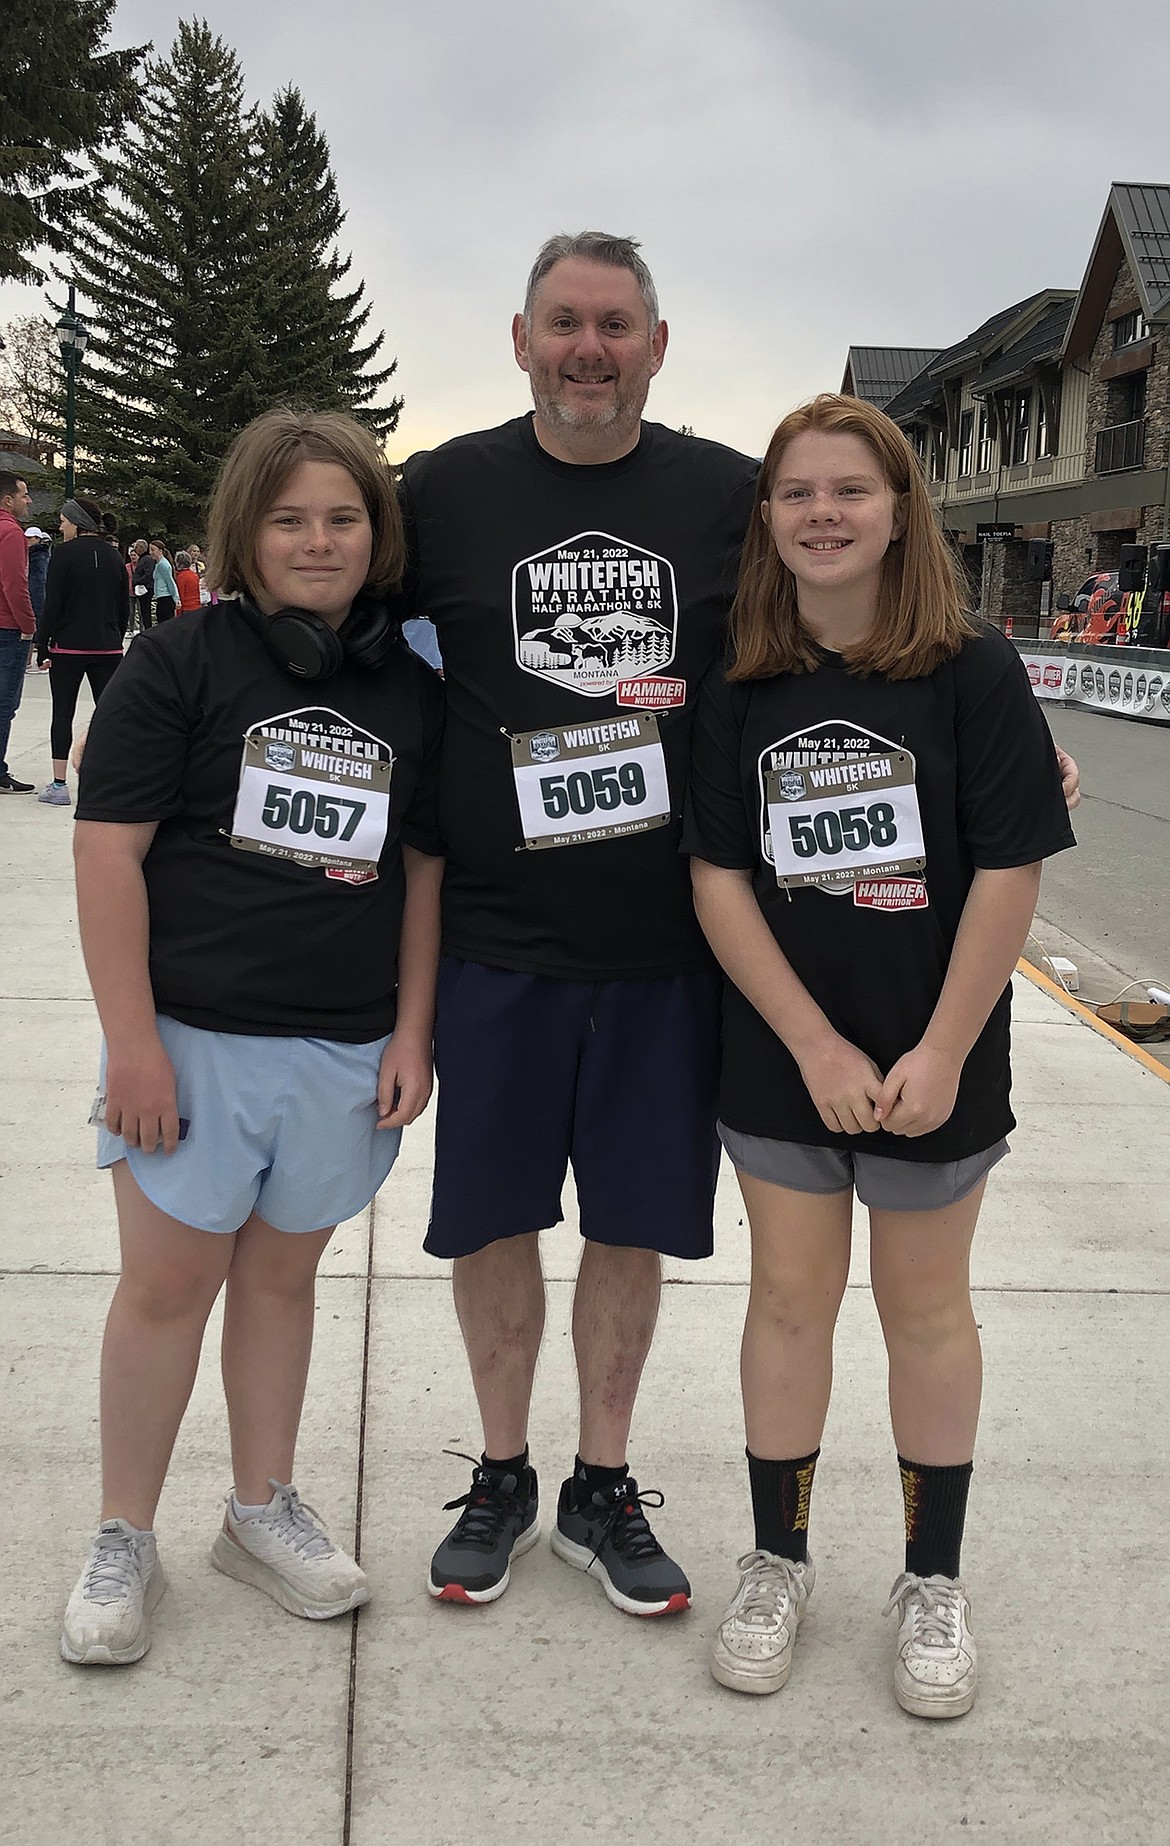 Twins Kate and Orla Sullivan, sixth graders at Whitefish Middle School, gave it their all this weekend racing their first 5K at the Whitefish Marathon event. Pictured with their step-dad Kenny Ross. (Photo submitted by Claire Sullivan)